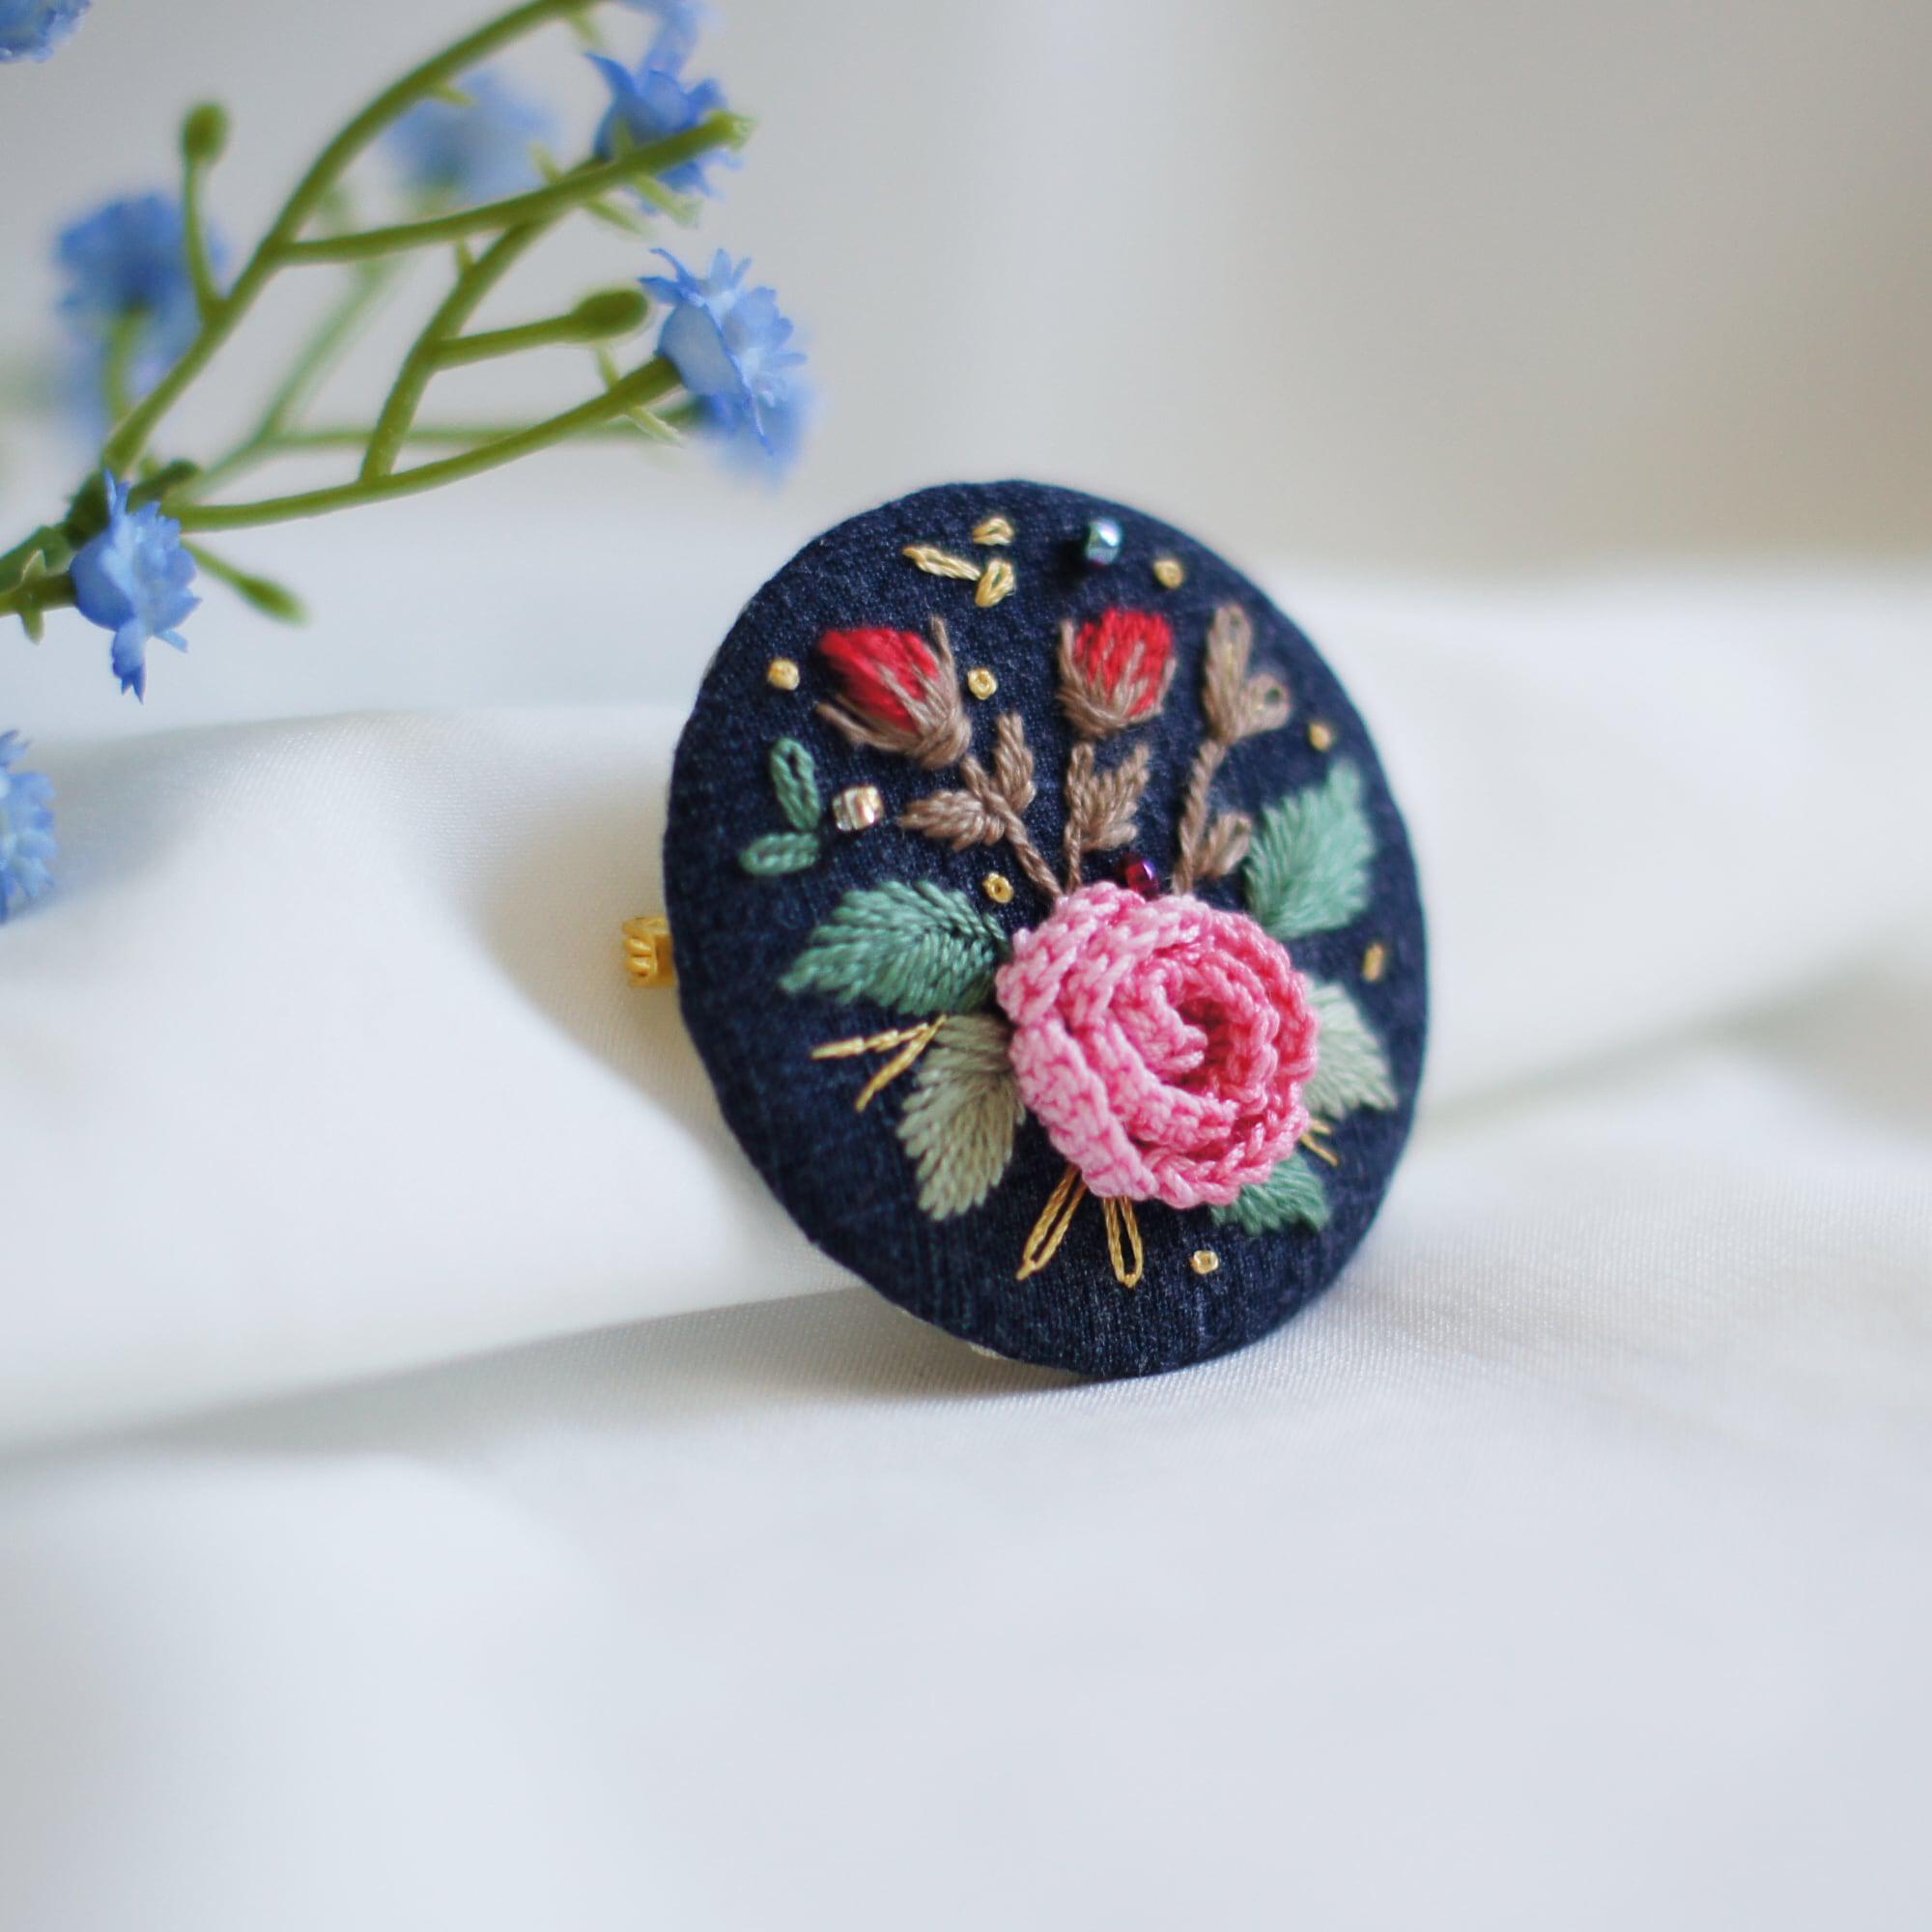 Handcrafted Rose Brooch Pins - Unique and Delicate Floral Jewelry for Women  - Perfect Holiday Gift